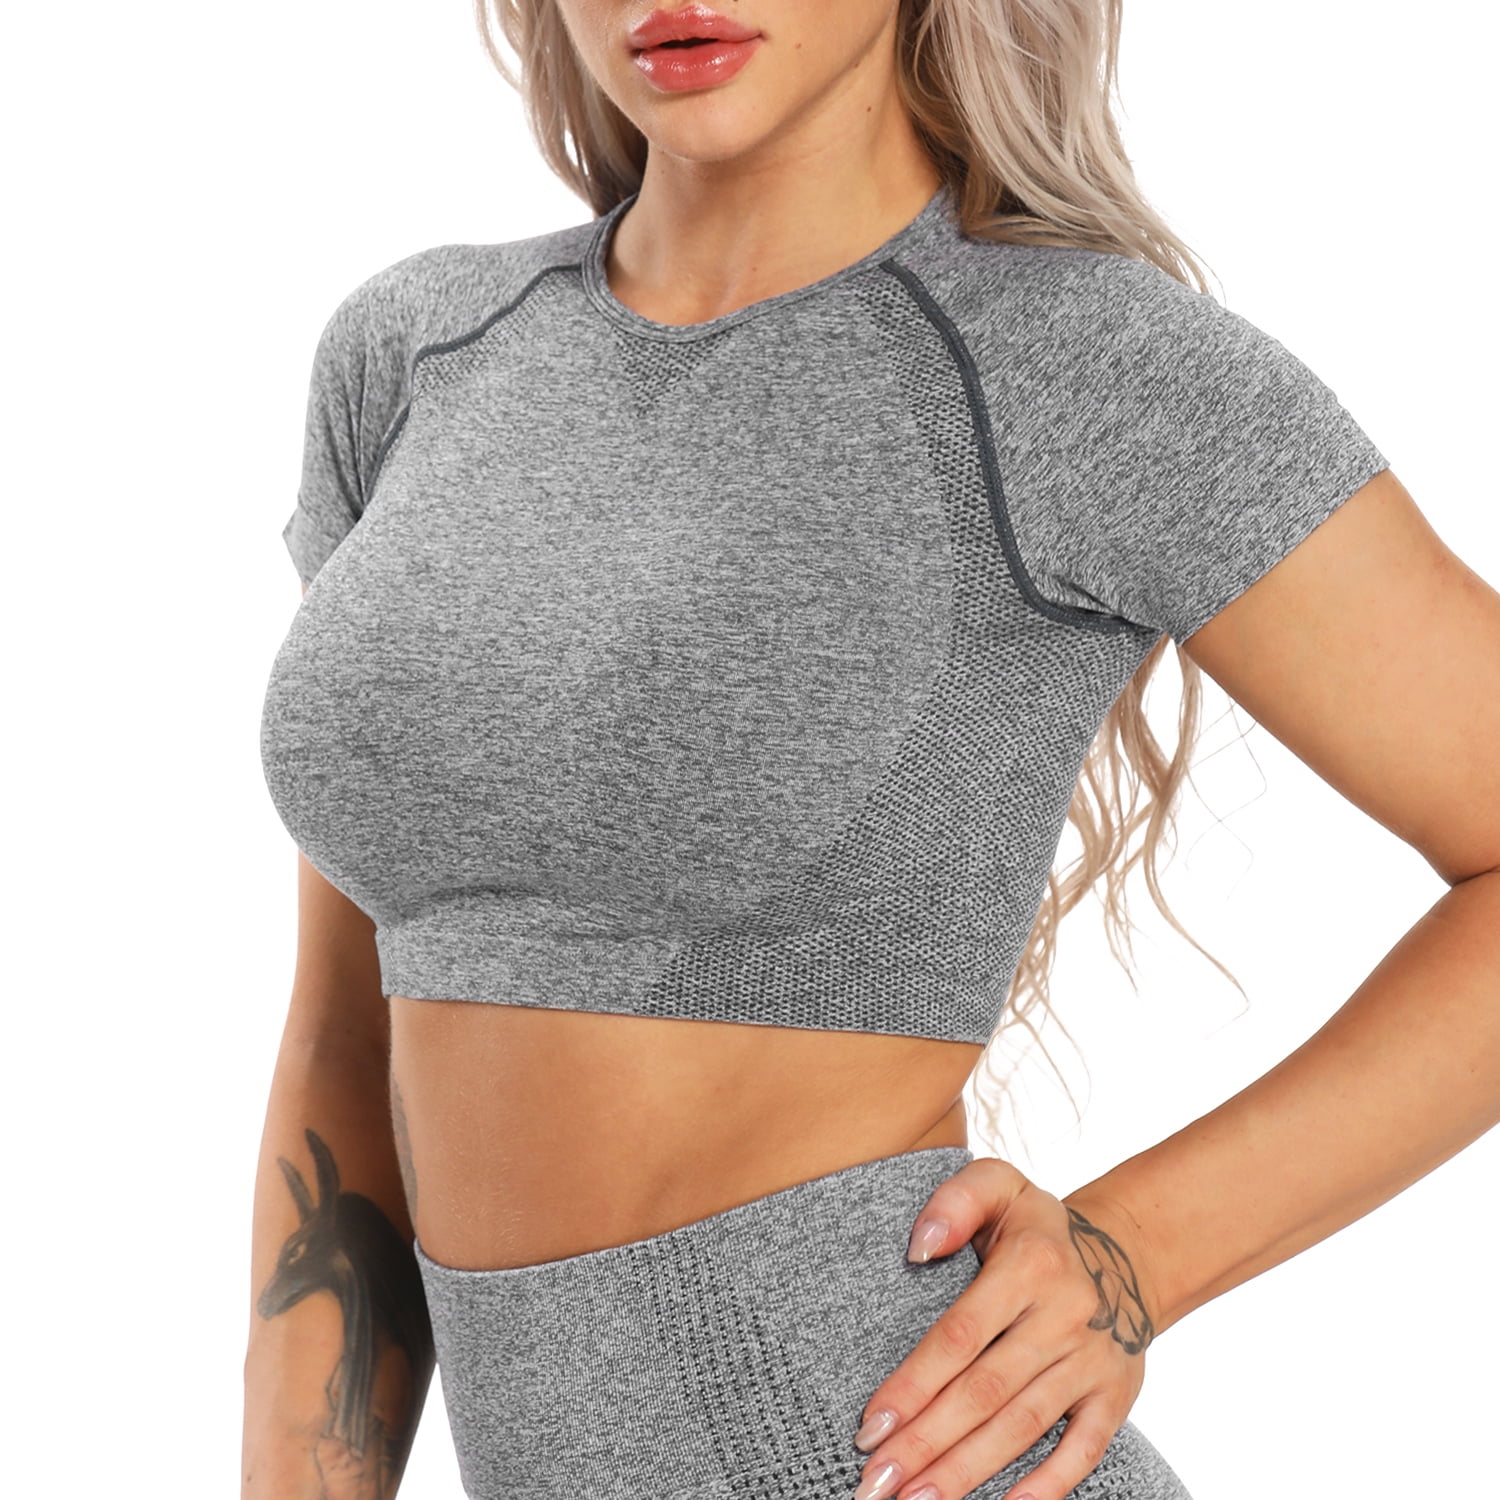 Wobity Workout Crop Tops for Women Short Sleeve Seamless Athletic Gym Shirts